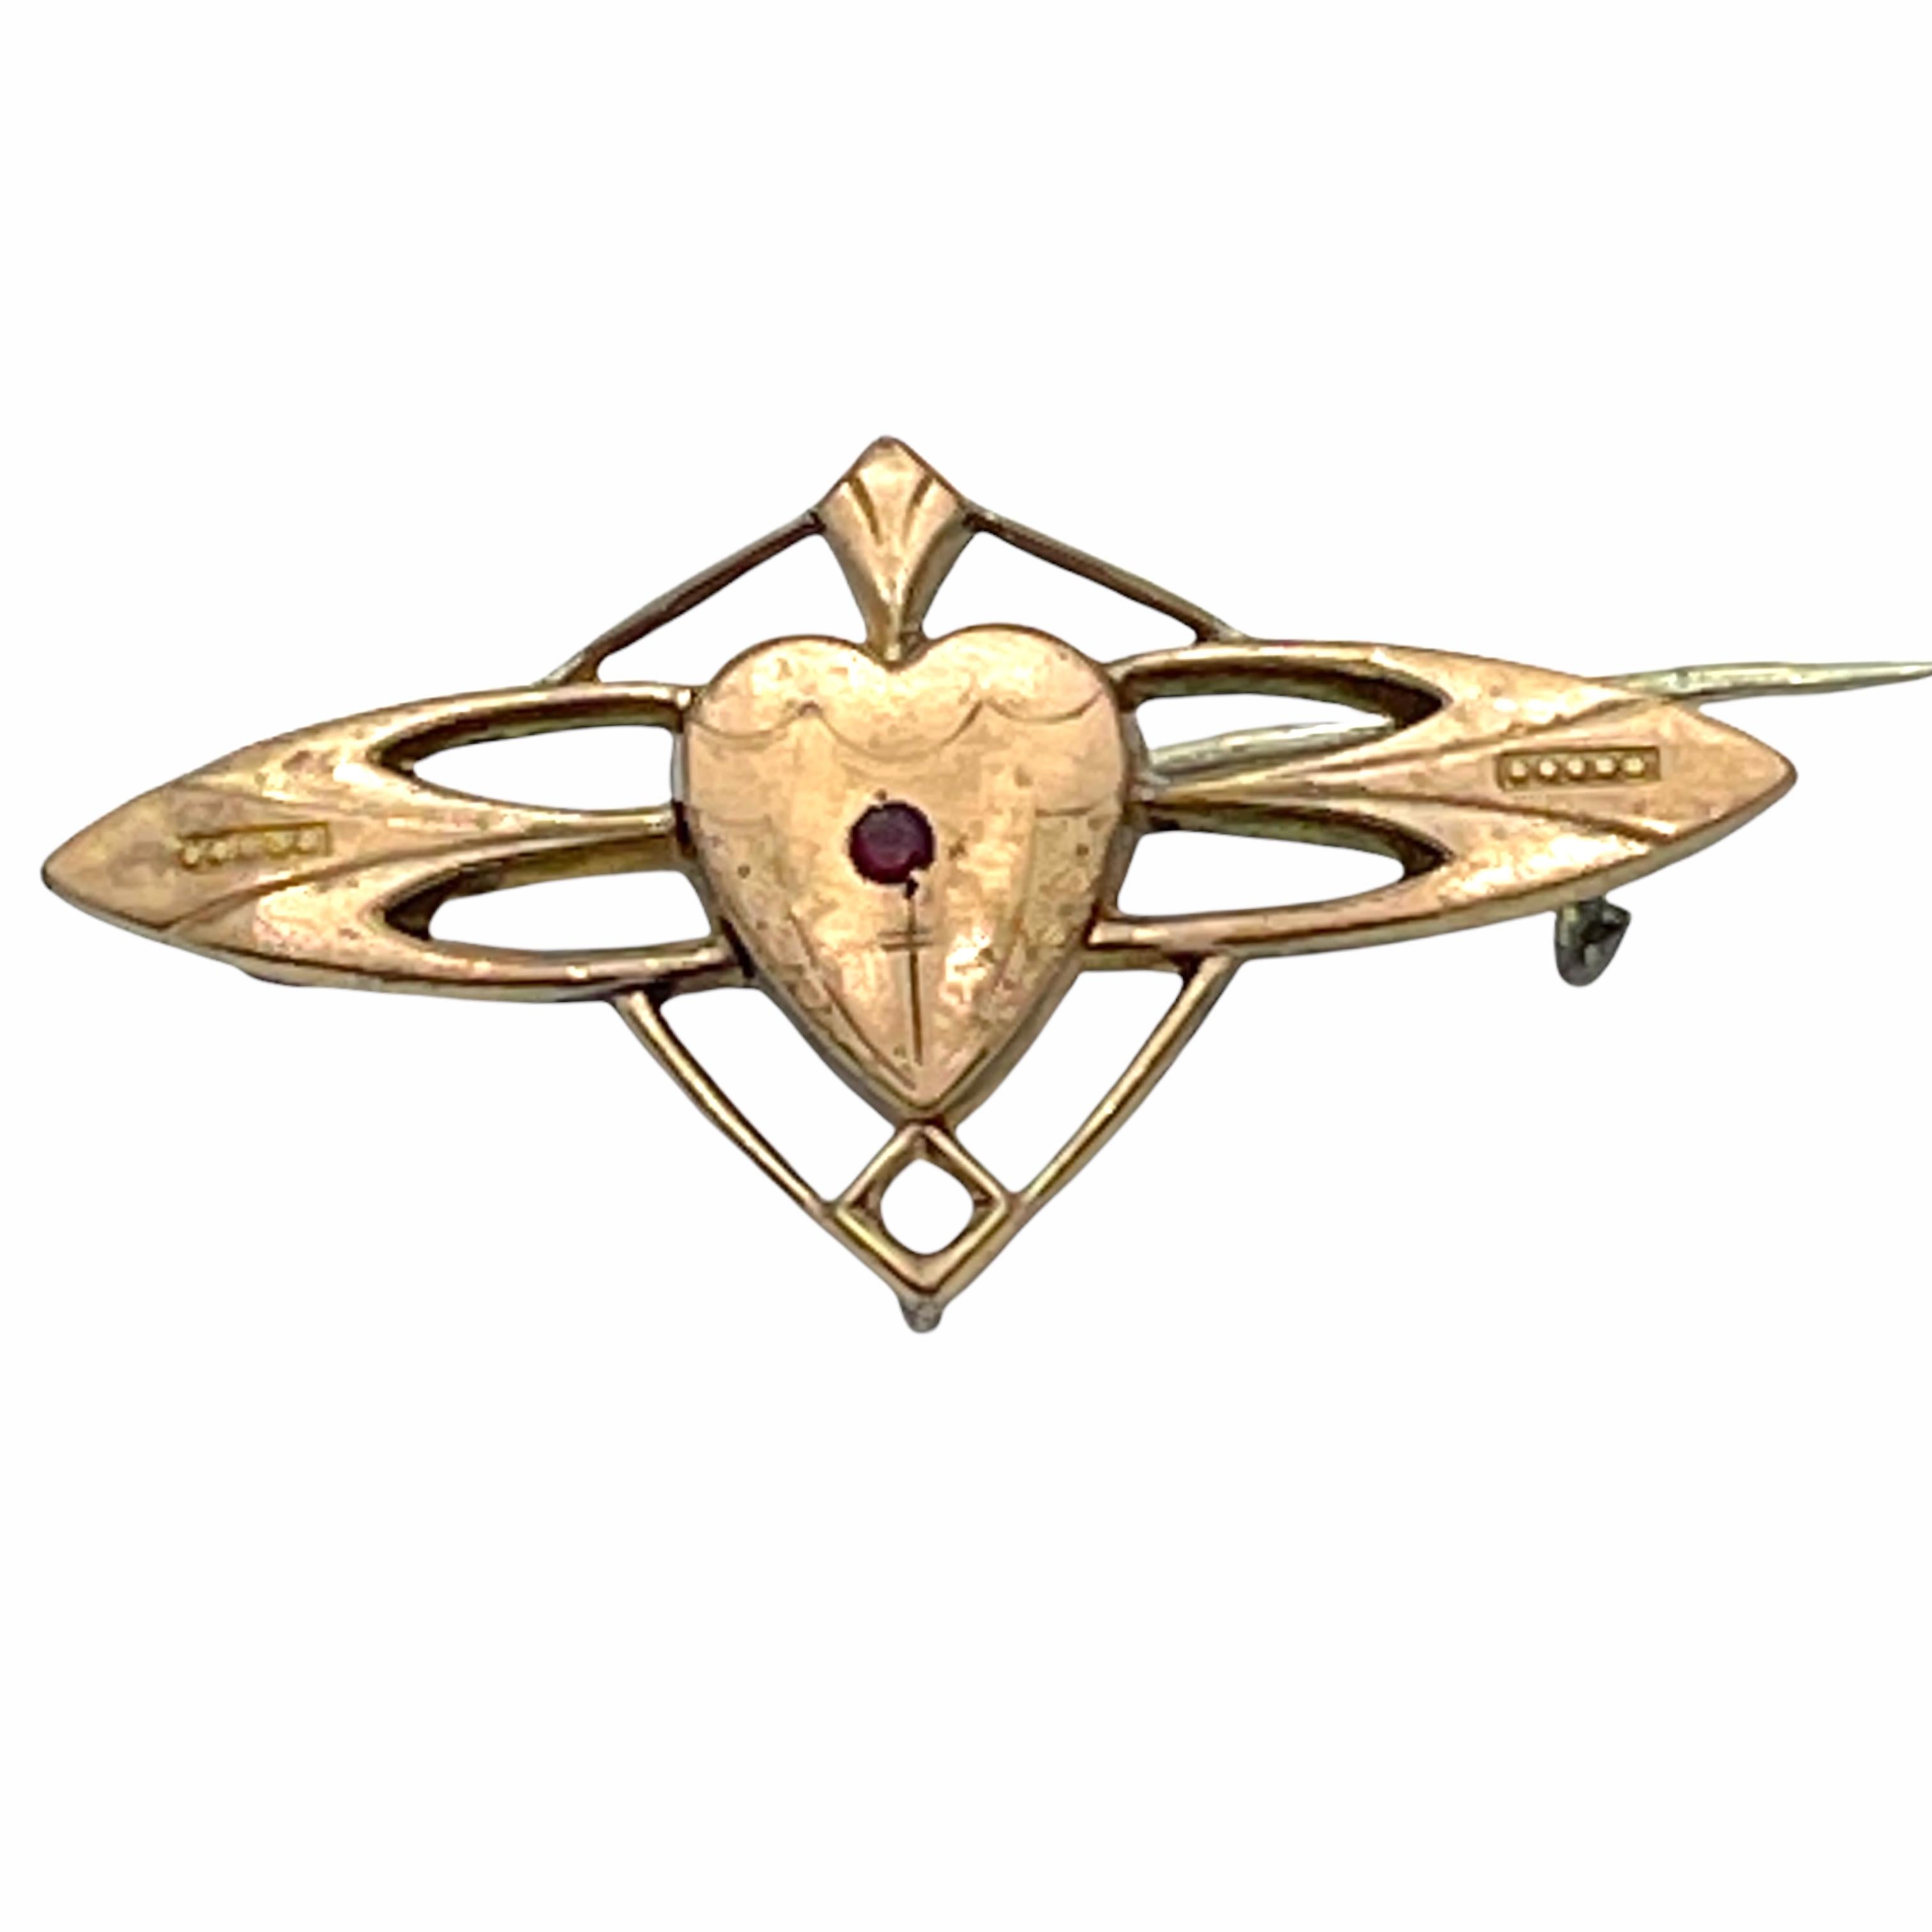 This lovely stylish sentimental brooch was made for a loved one. Made in Germany, circa 1900. The brooch has a red stone and a white stone (probably moonstone) in it.
A very pretty piece of antique jewellery which would make a fine addition to any